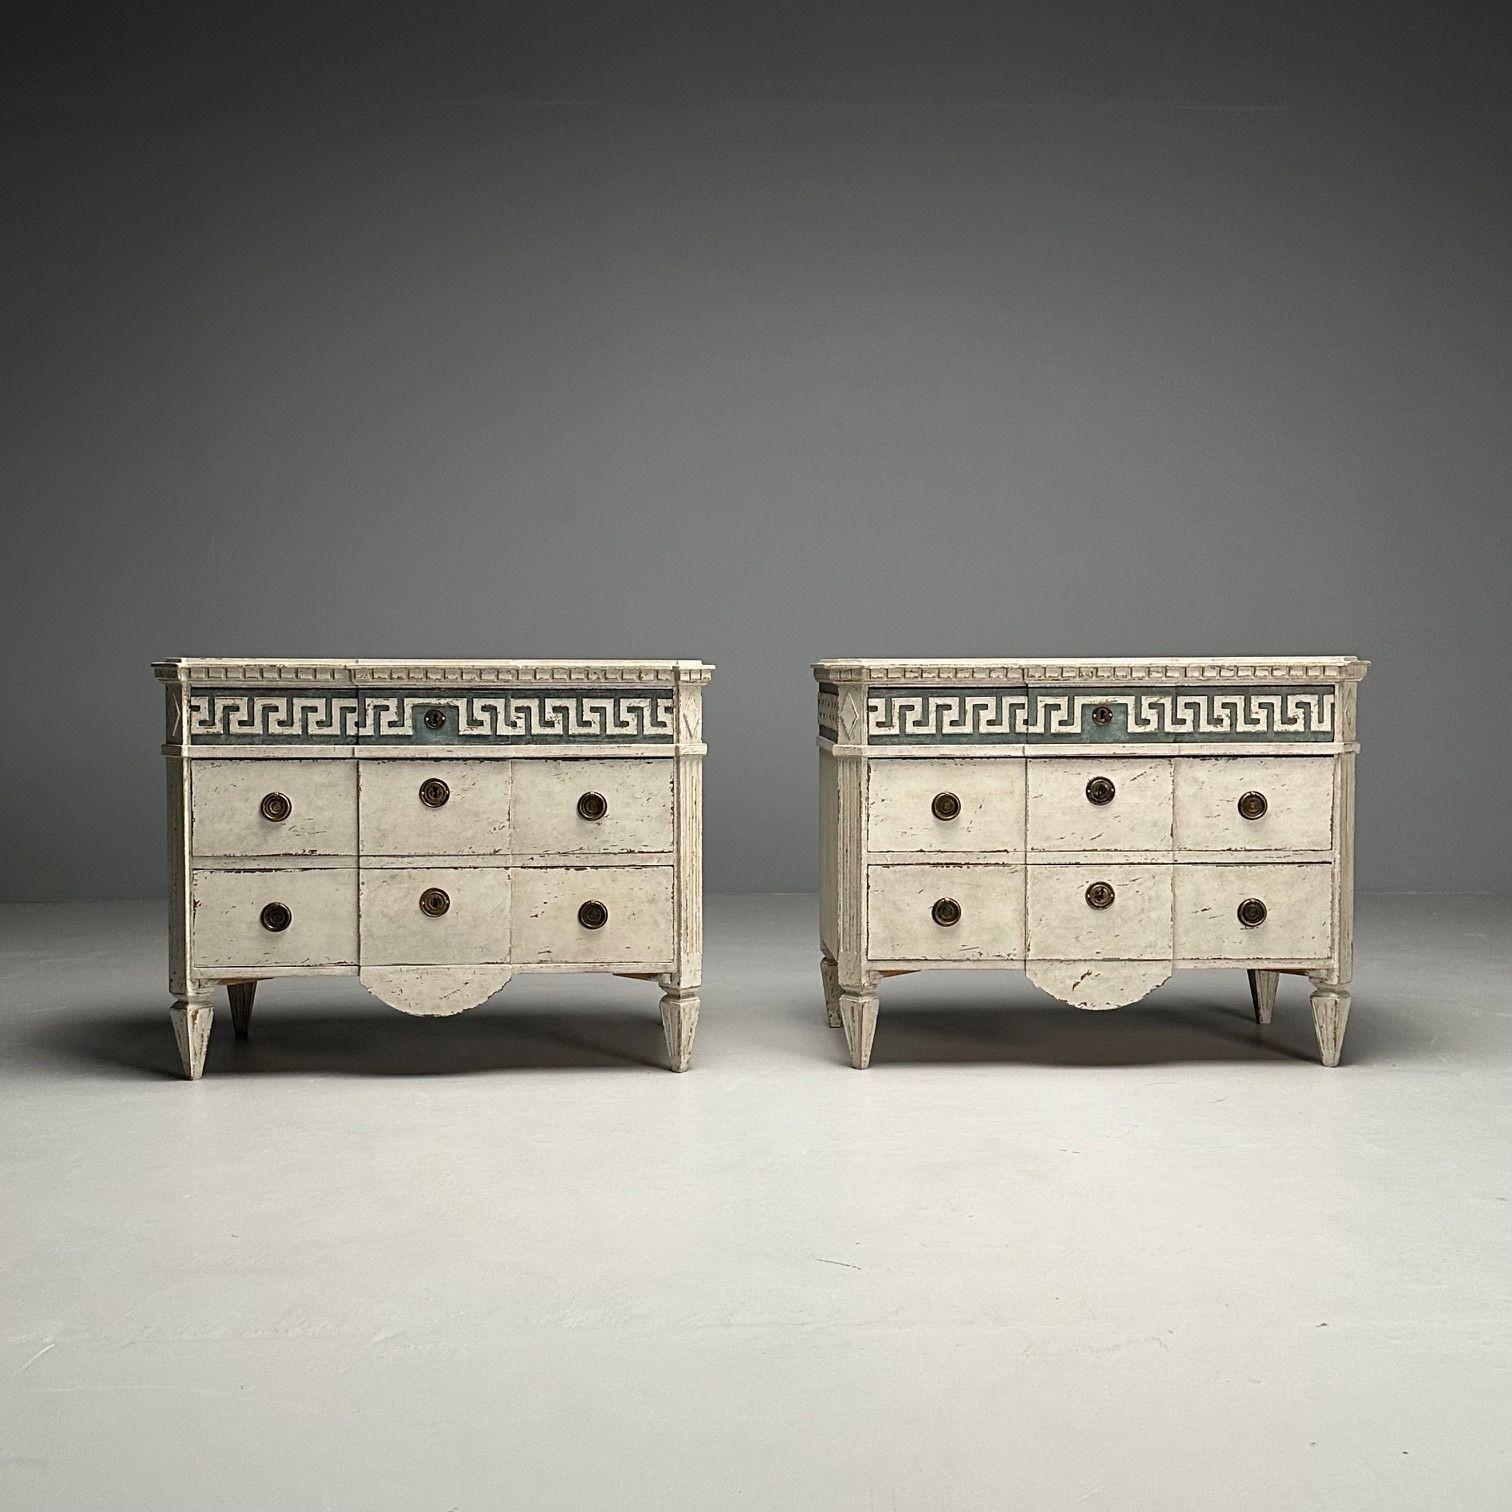 Gustavian, Swedish Painted Commodes or Nightstands, Greek Key Motif, White and Blue Paint Distressed

Pair of Gustavian commodes or nightstands designed and produced in Sweden in the early part of the 20th century. The pair having block front cases